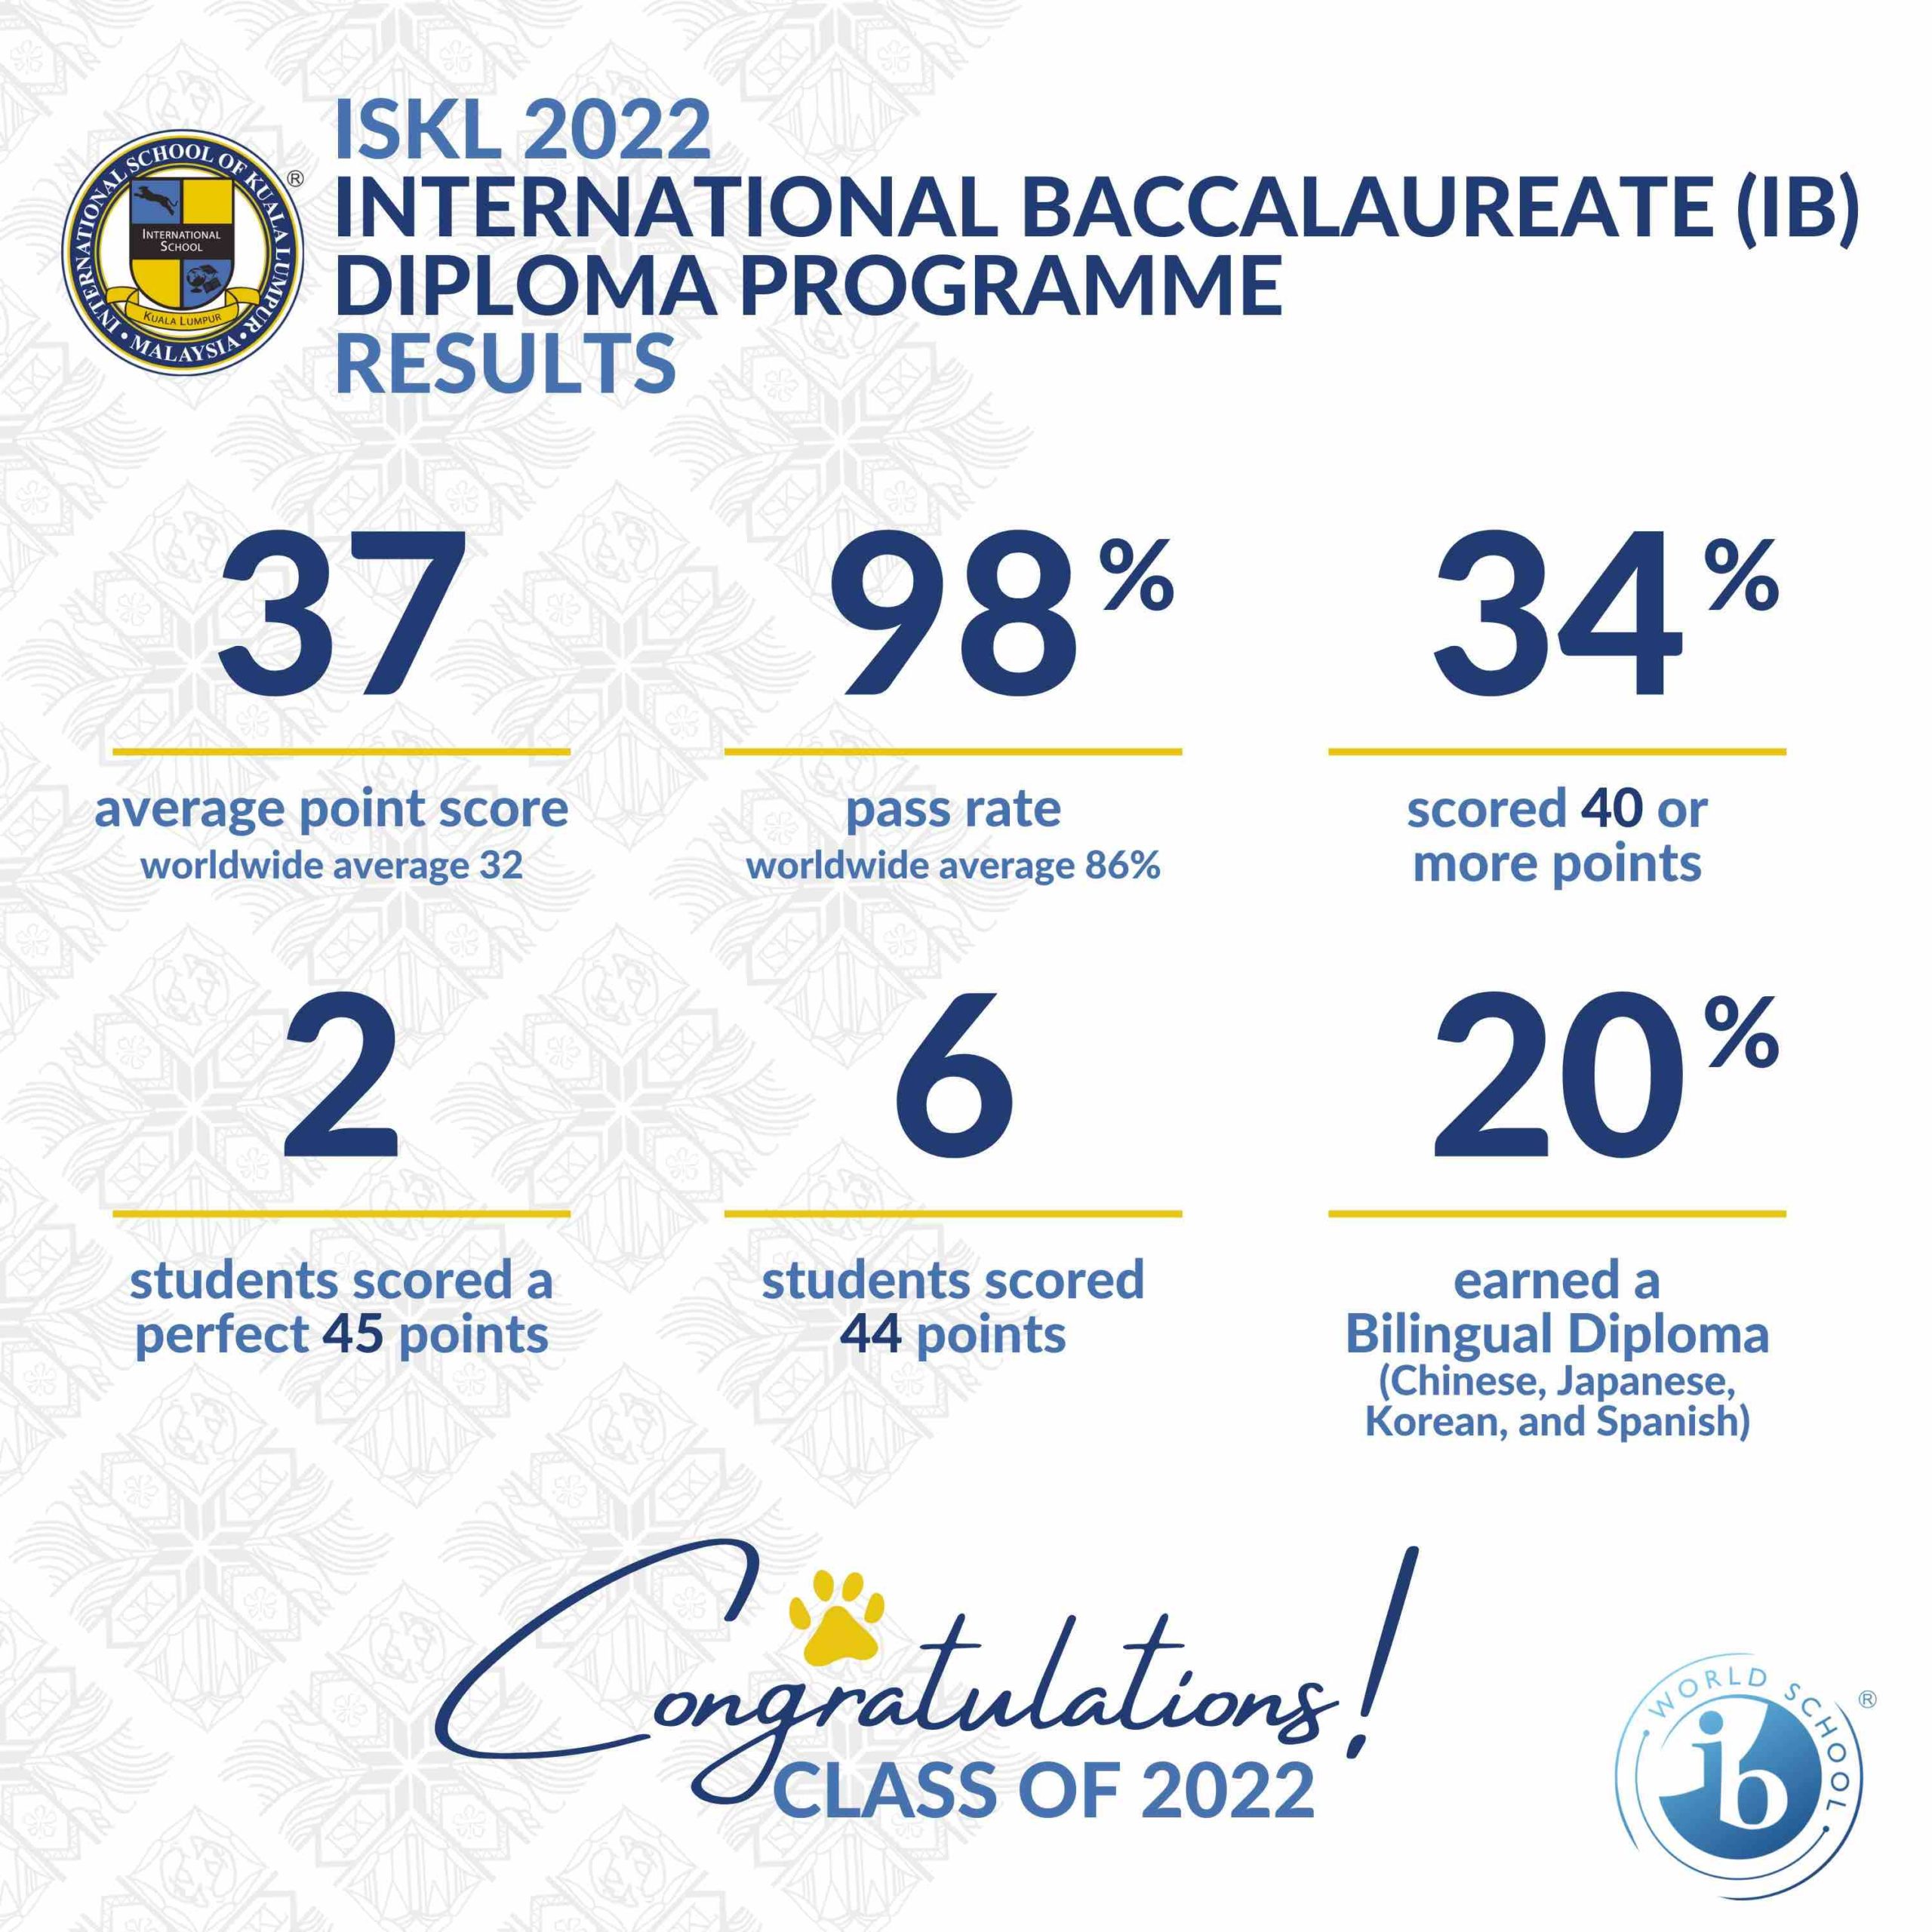 IB RESULTS SCORES